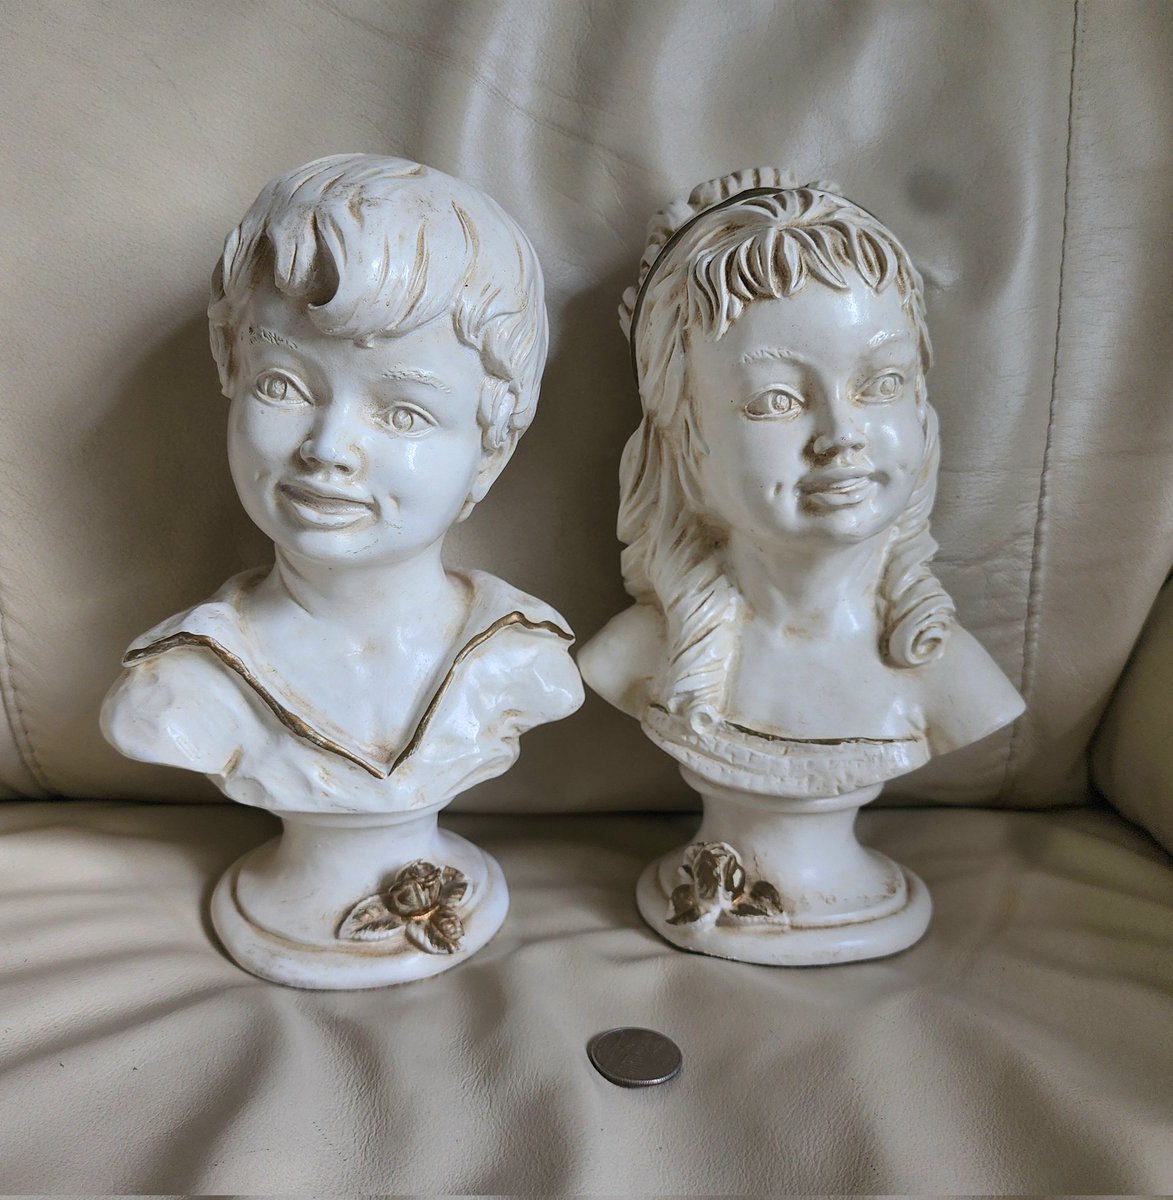 Vintage boy and girl busts statues 1962 by Universal Statuary Corp 10 inches tall home decorative display. rjbeavintagecravings.etsy.com/listing/171430…